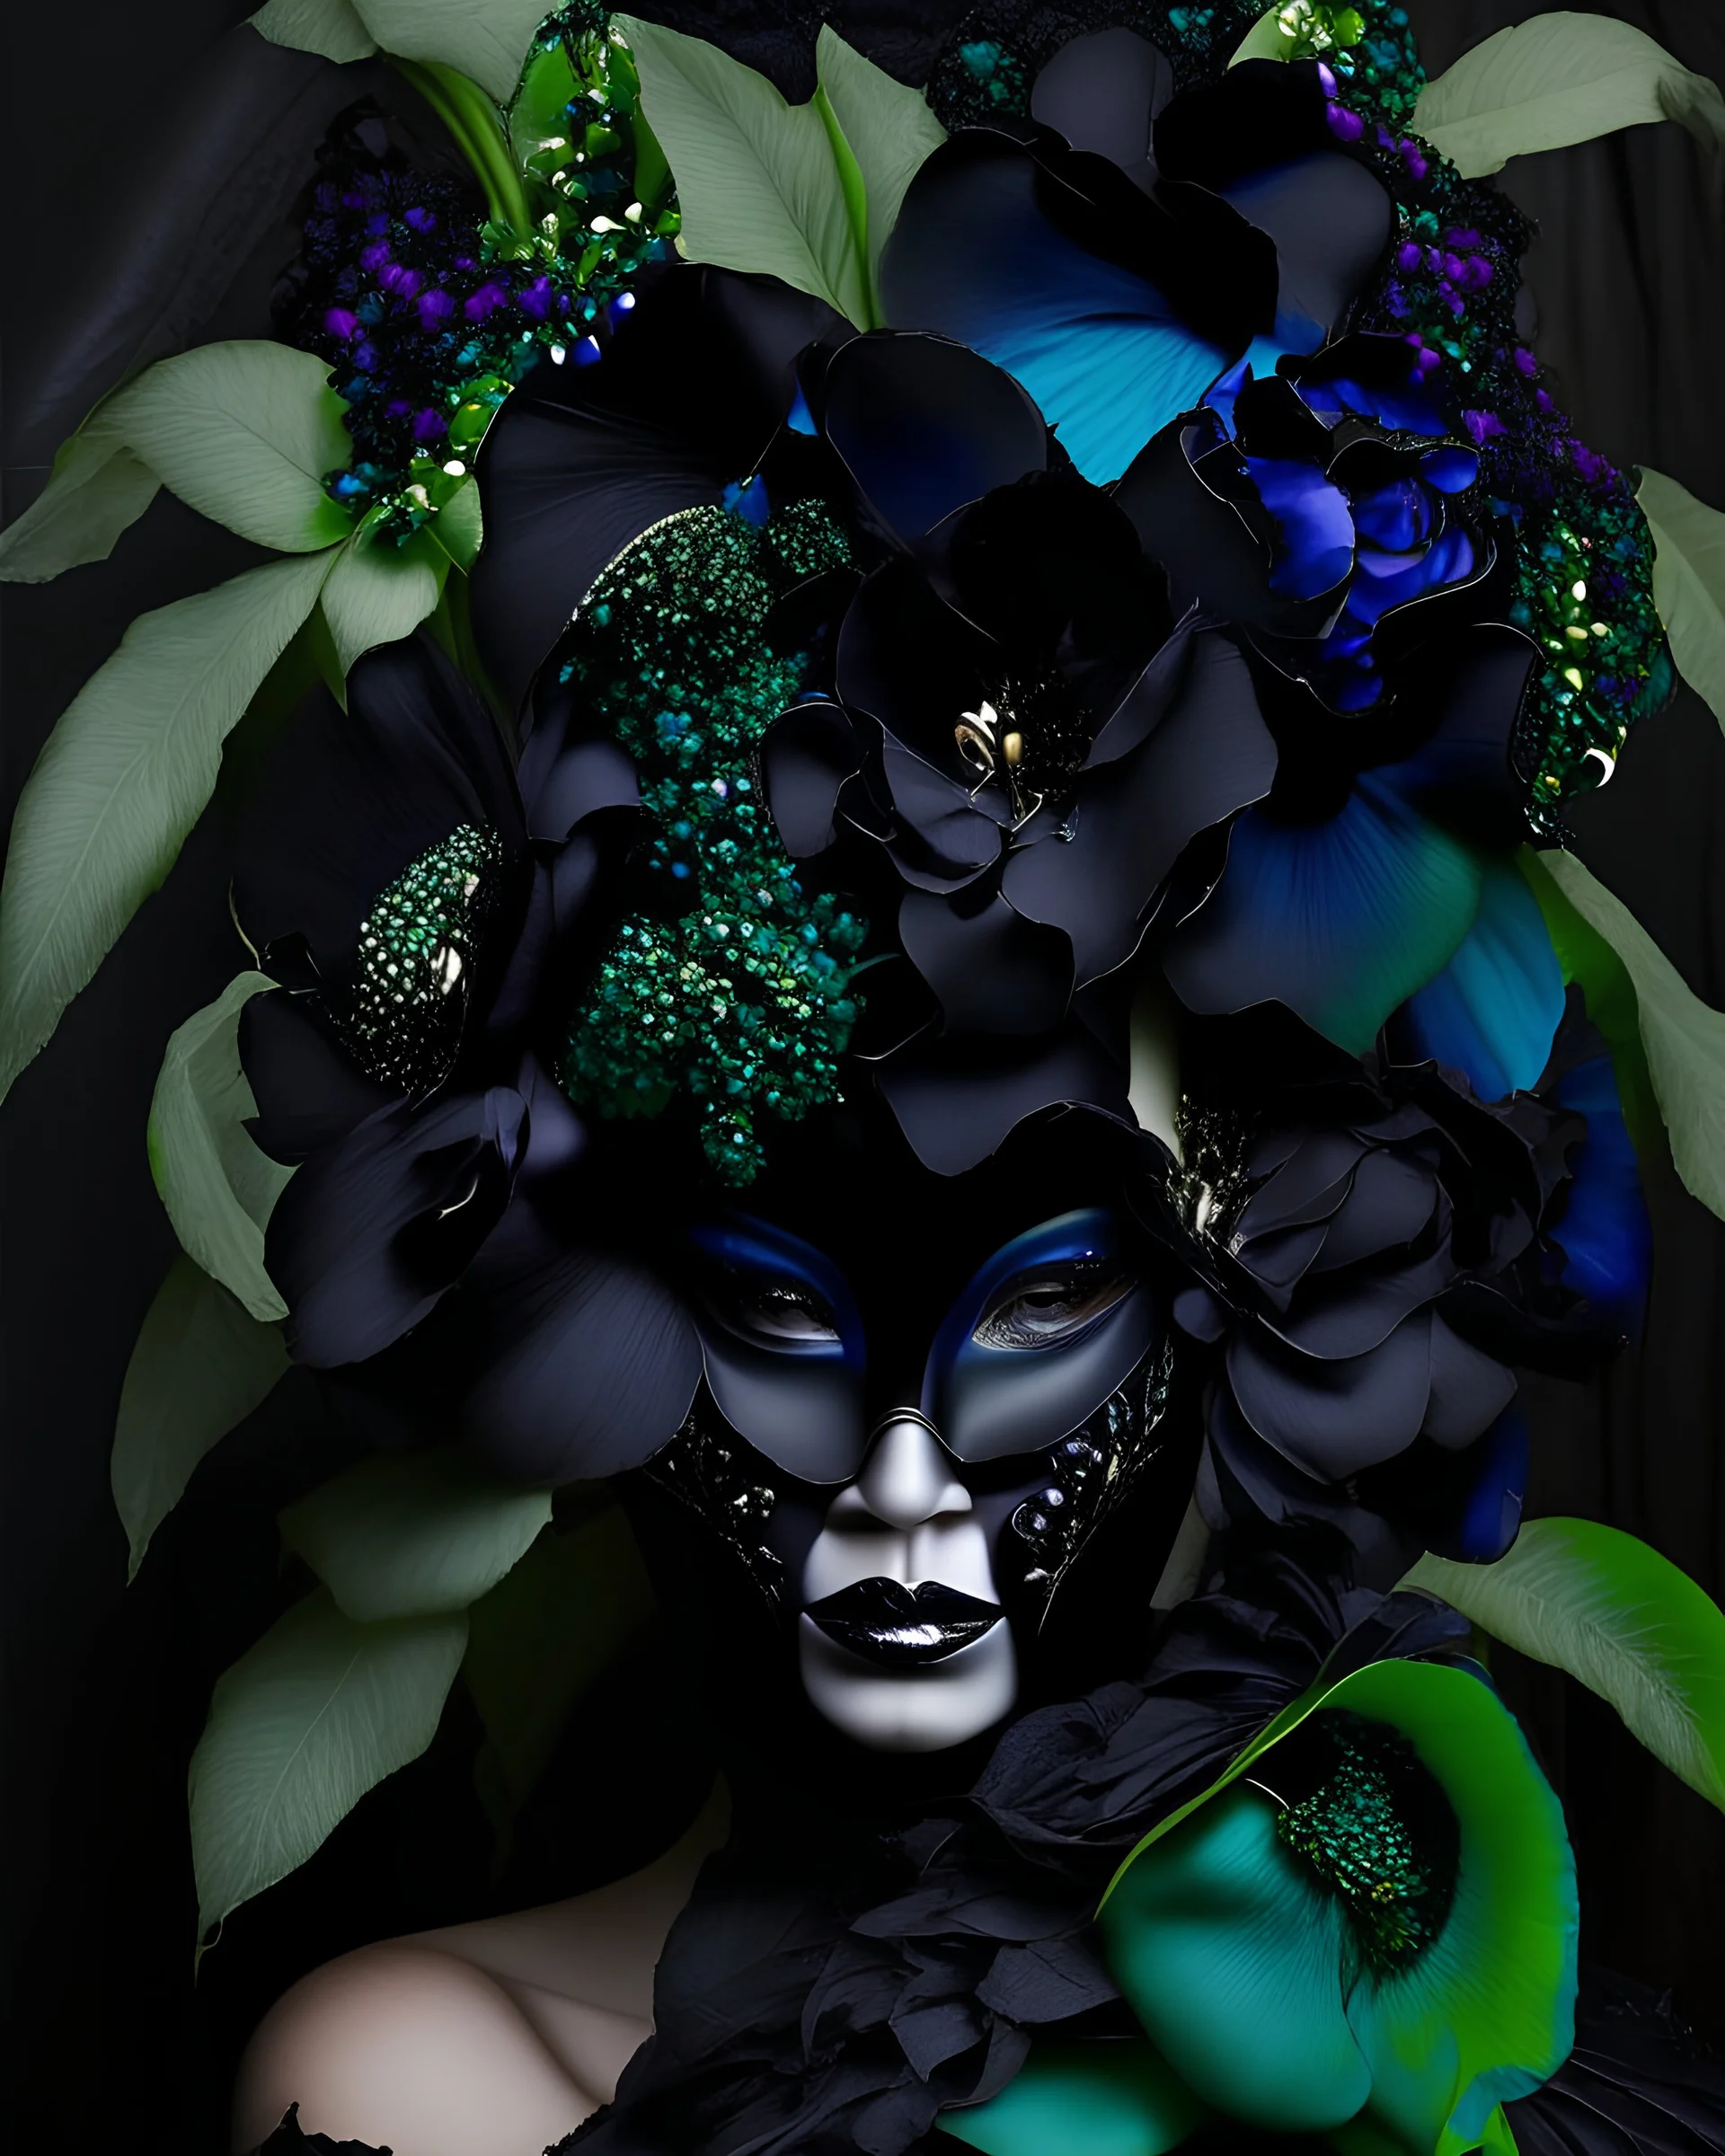 Beautiful venetian black orchid flower and black hydrangeaa with black Bell flower. and and black mollusk shell colour bioluminescense black orchid and white el flower black carnival style voidcore shamanism masquerade woman portrait adorned with black hydrangea and green ad black and oil blue and malachite colour and inwarl stone orcidflower flower headdress and black orchid foral leaves botanical black hydrangea metallic filigree masque venetian rennaisace mollusk shell colour extremely detail